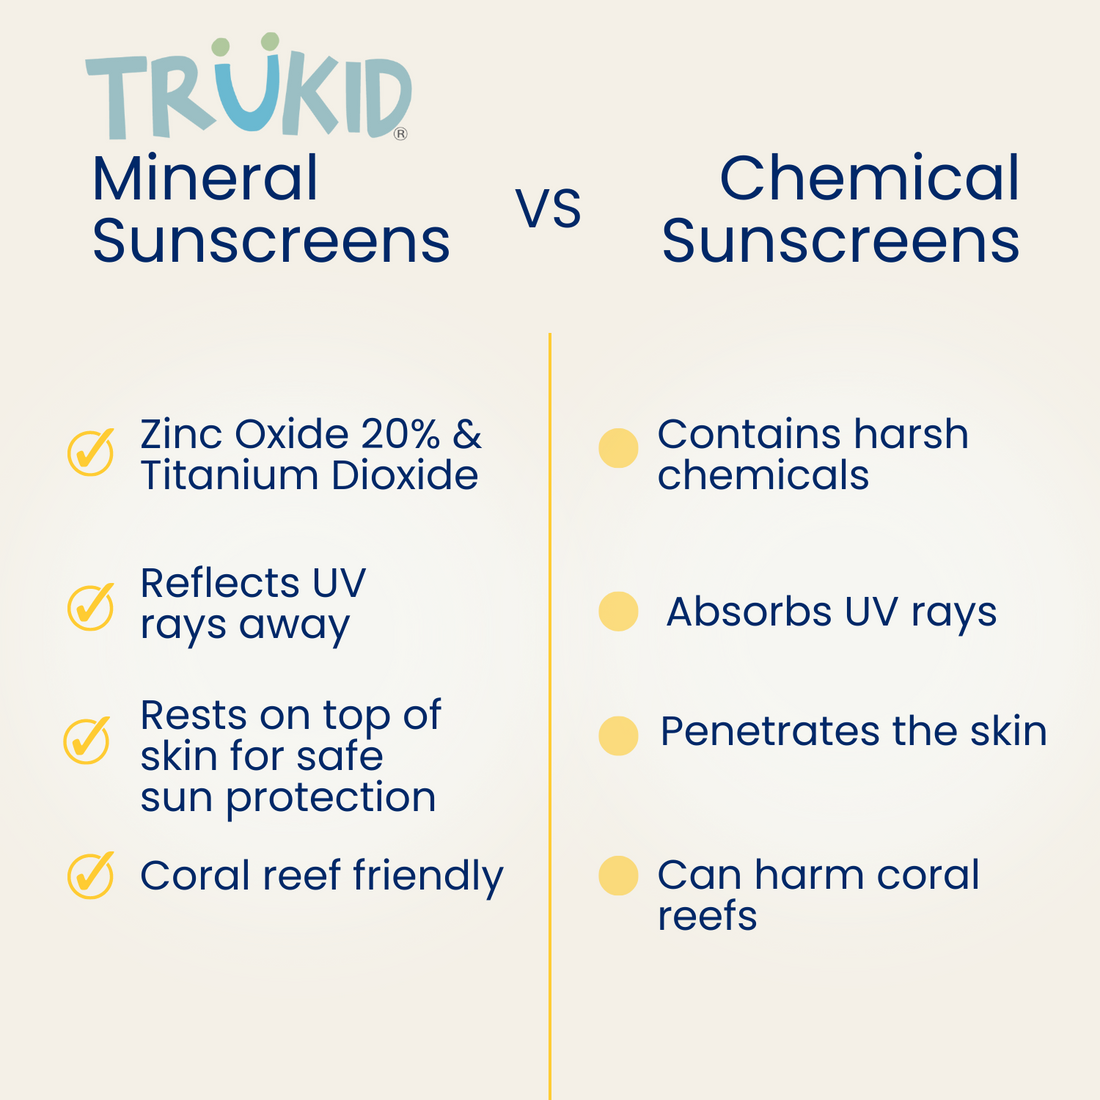 TruKid Sunny Days Daily SPF30 Sunscreen Mineral versus Chemical